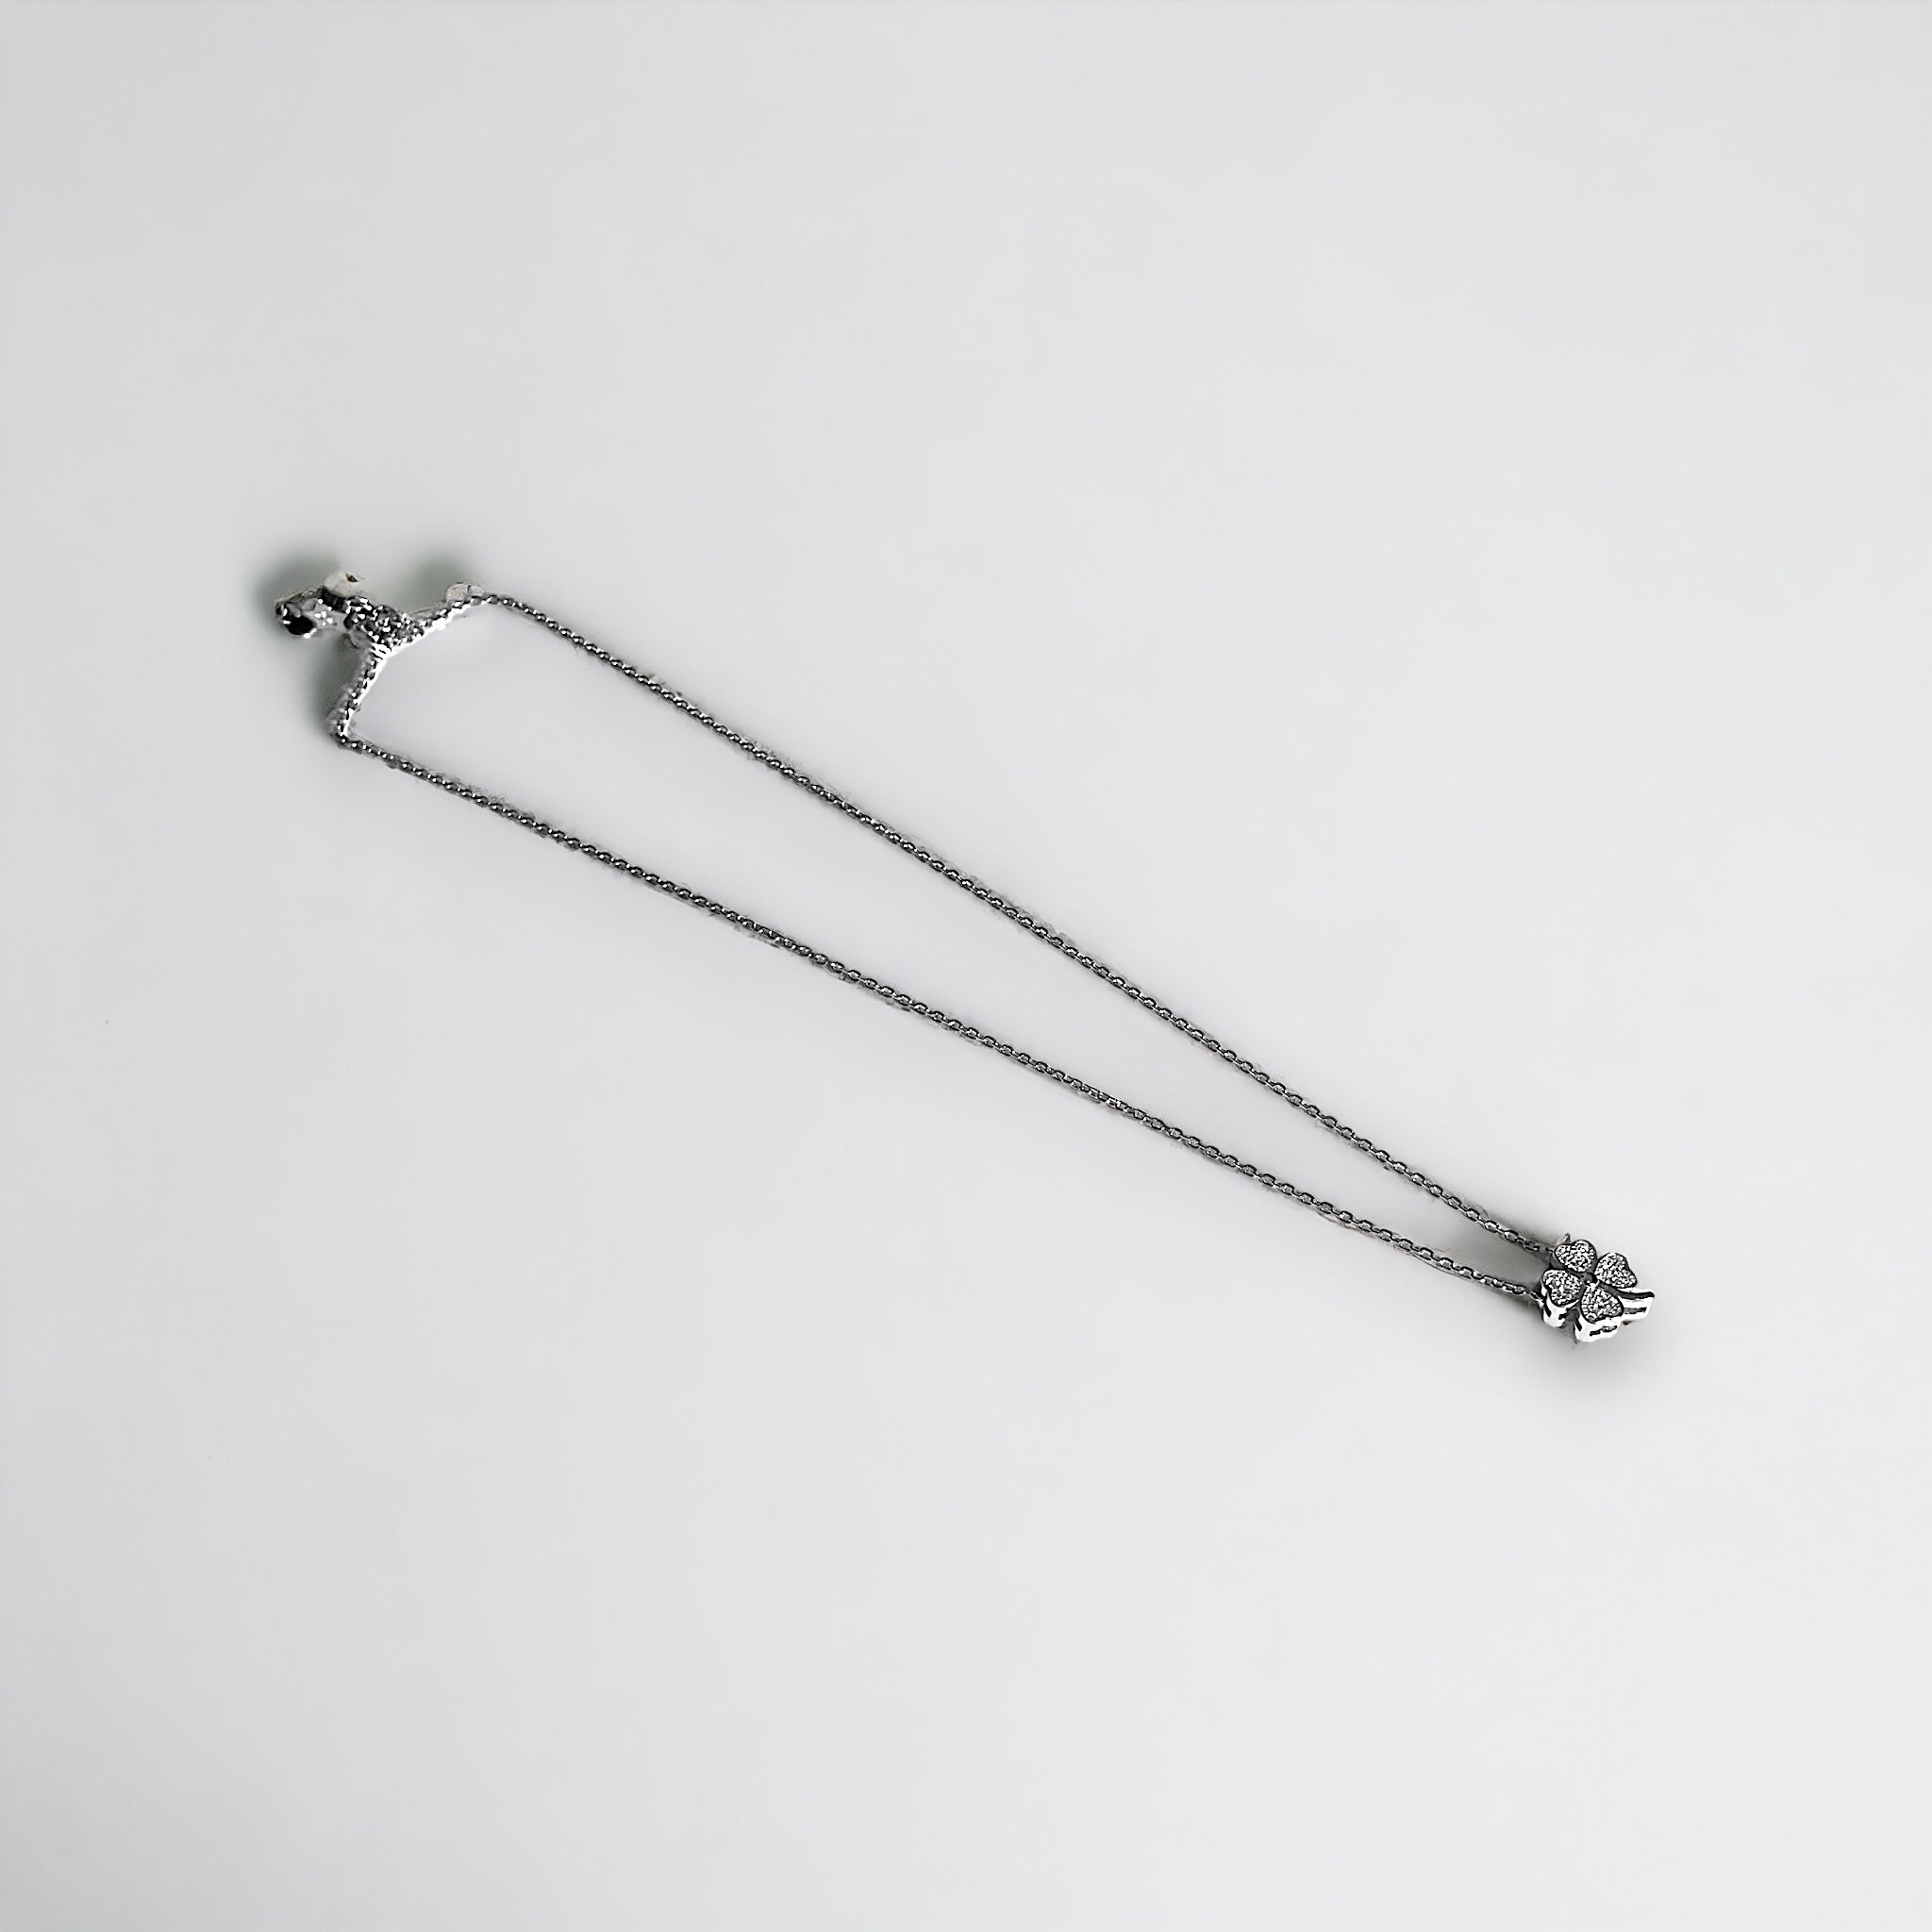 a white background with a metal object on it